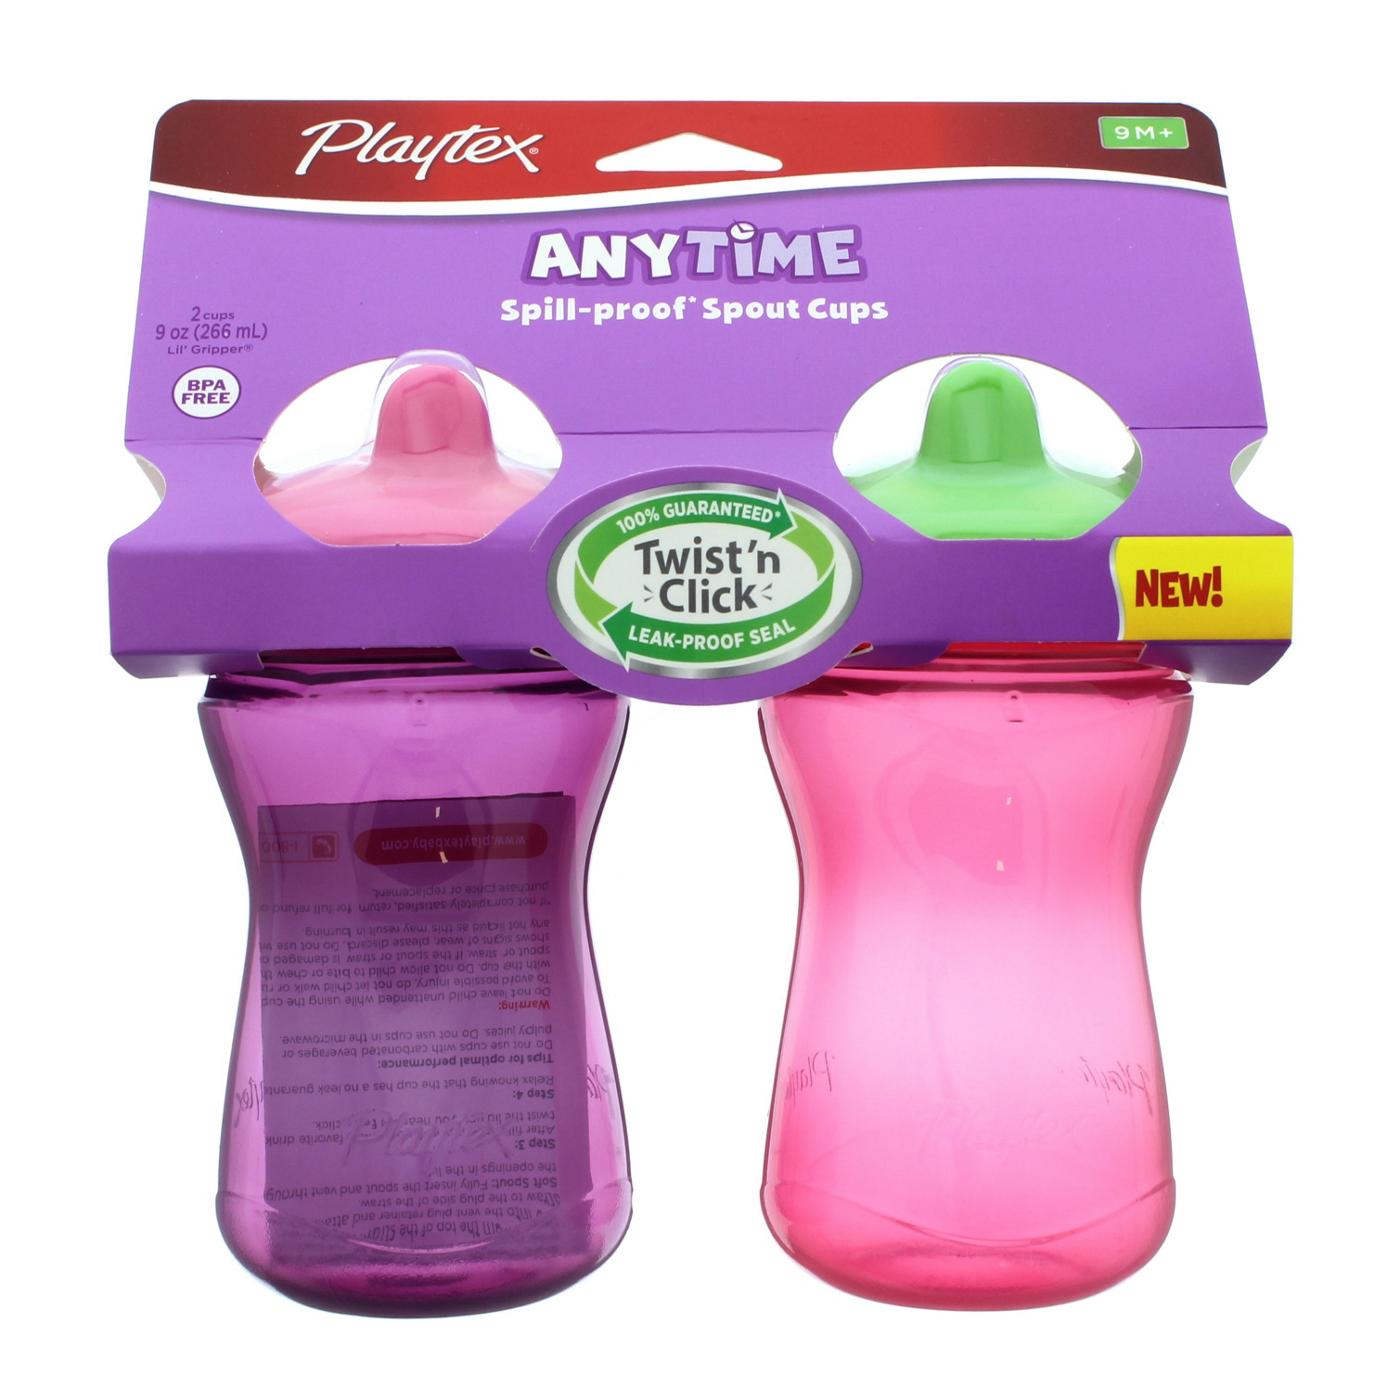 Playtex AnyTime Spill-Proof Spout Cups 9 OZ (9M +), Assorted Colors; image 2 of 2